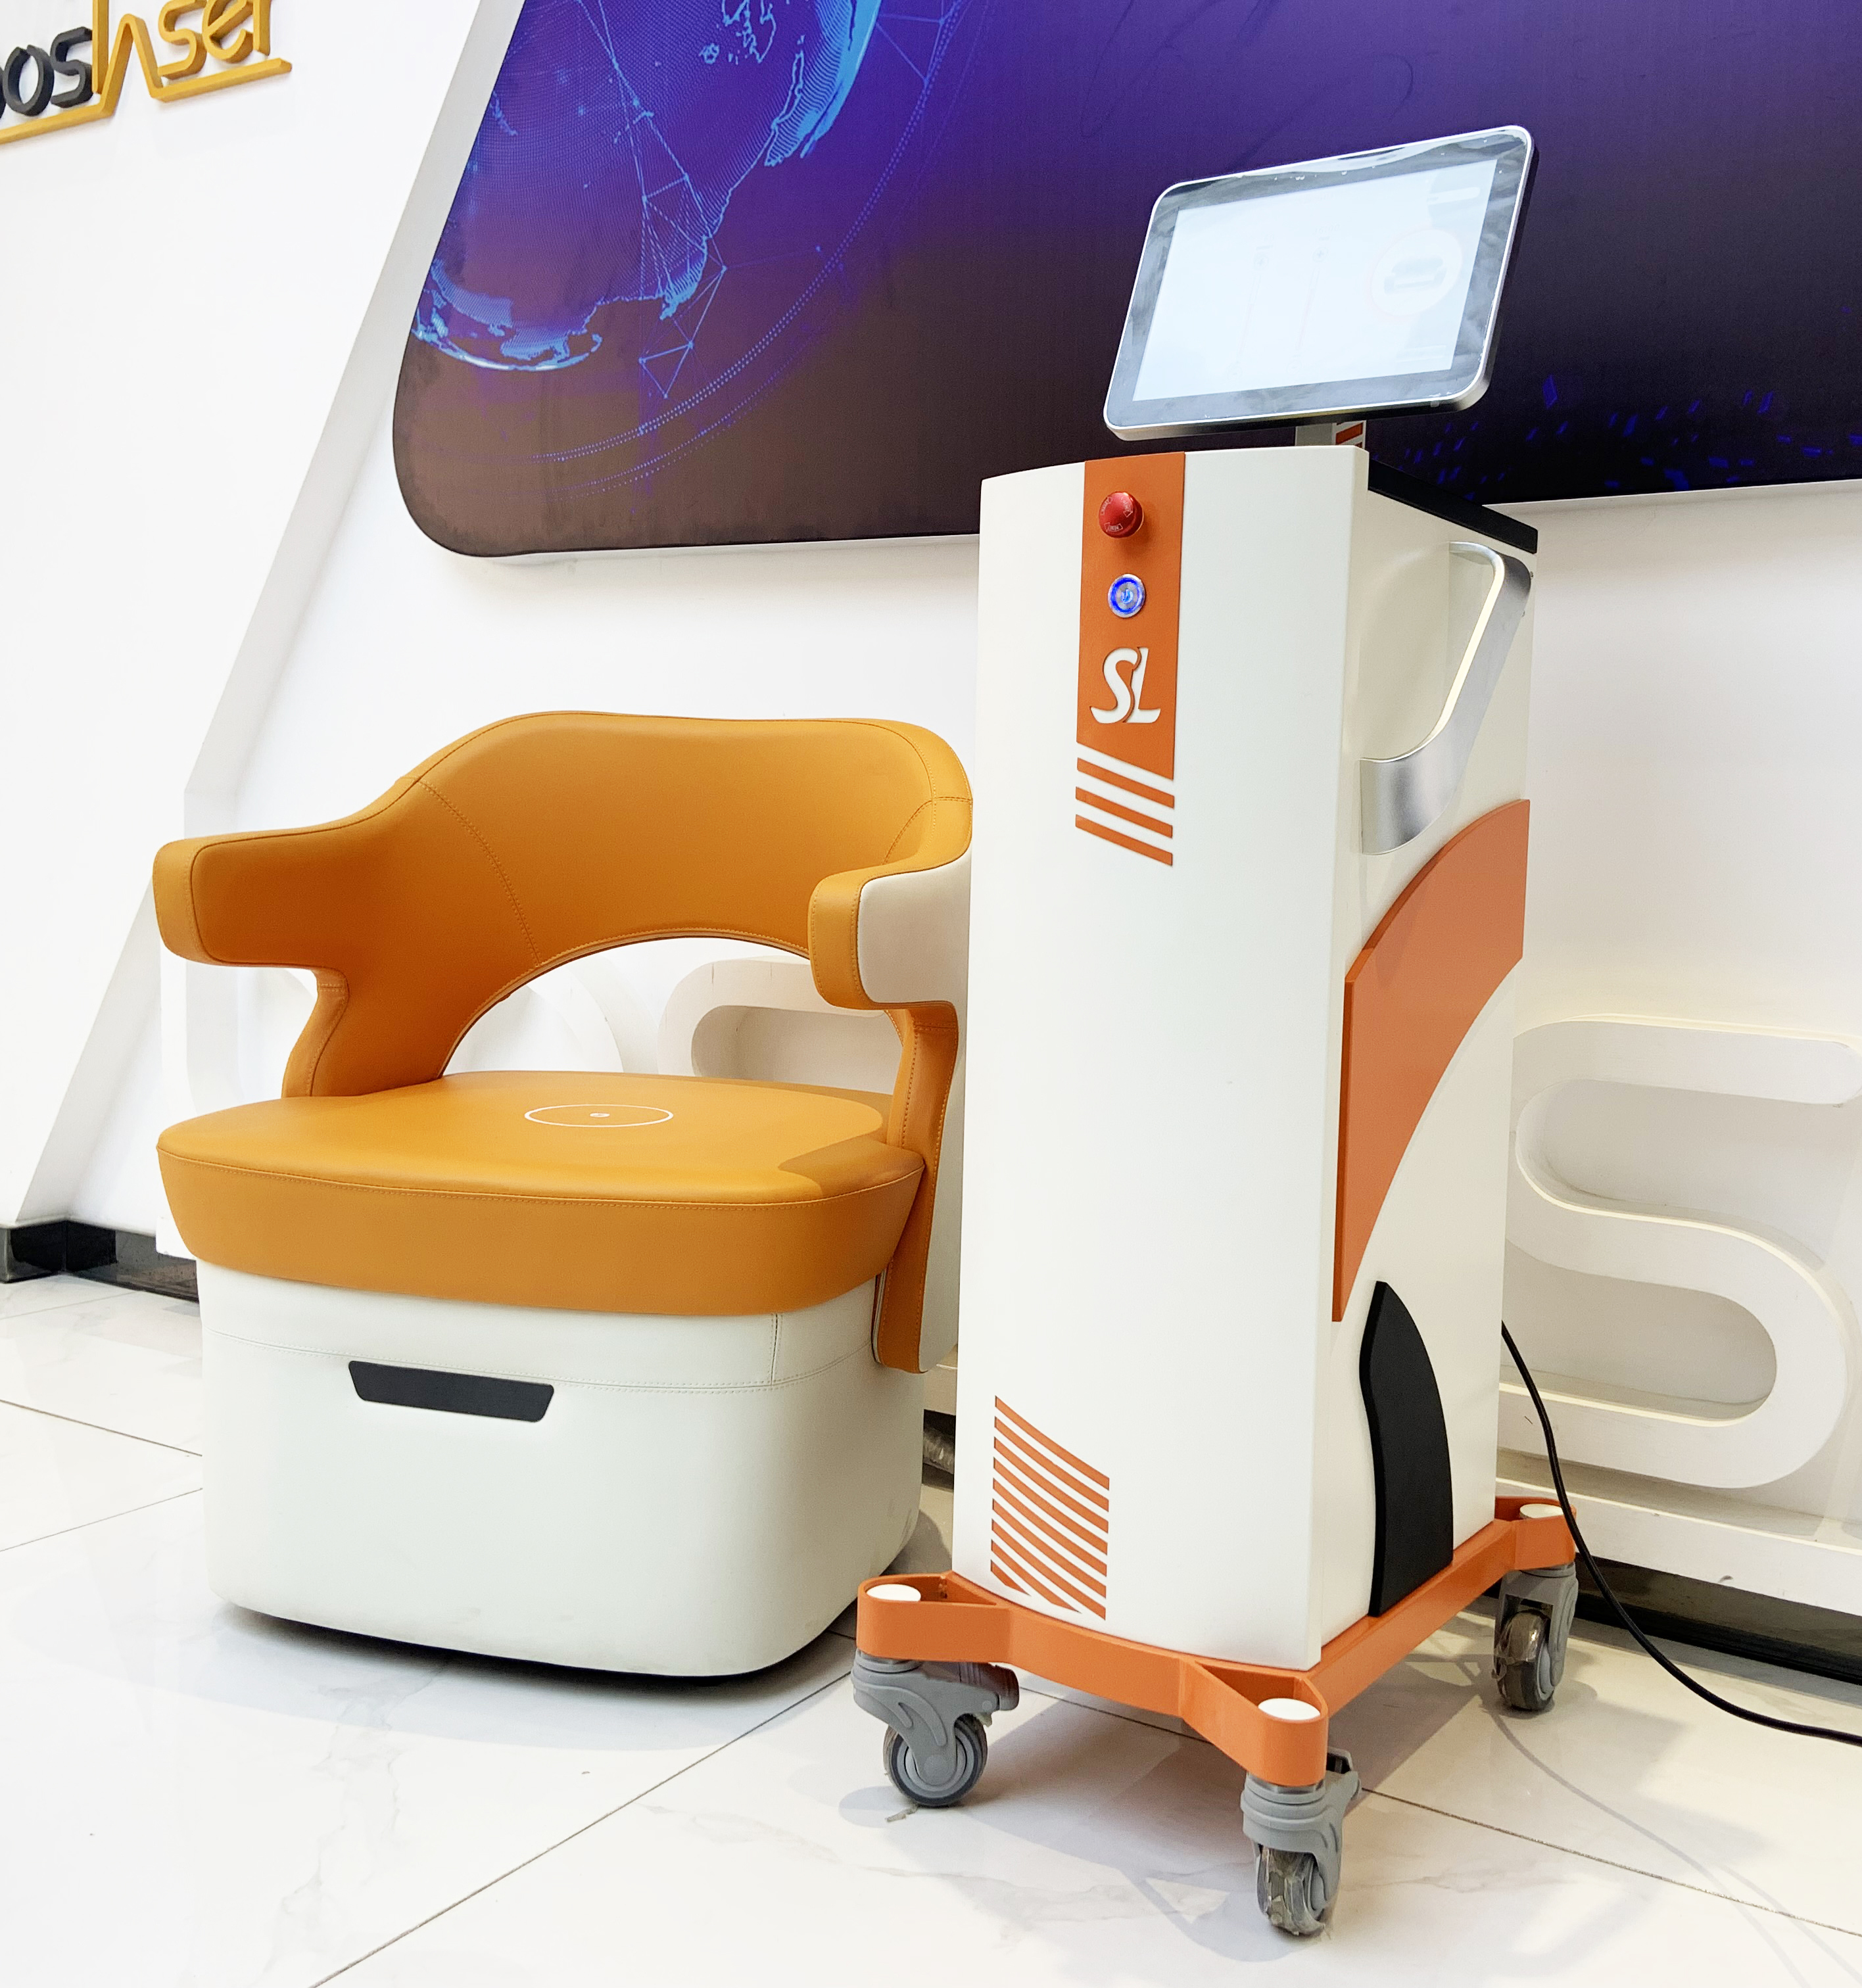 High-intensity focused electromagnetic energy (HIFEM) deep and intense pelvic-floor muscle contraction magchair ems sculpting PFM machine